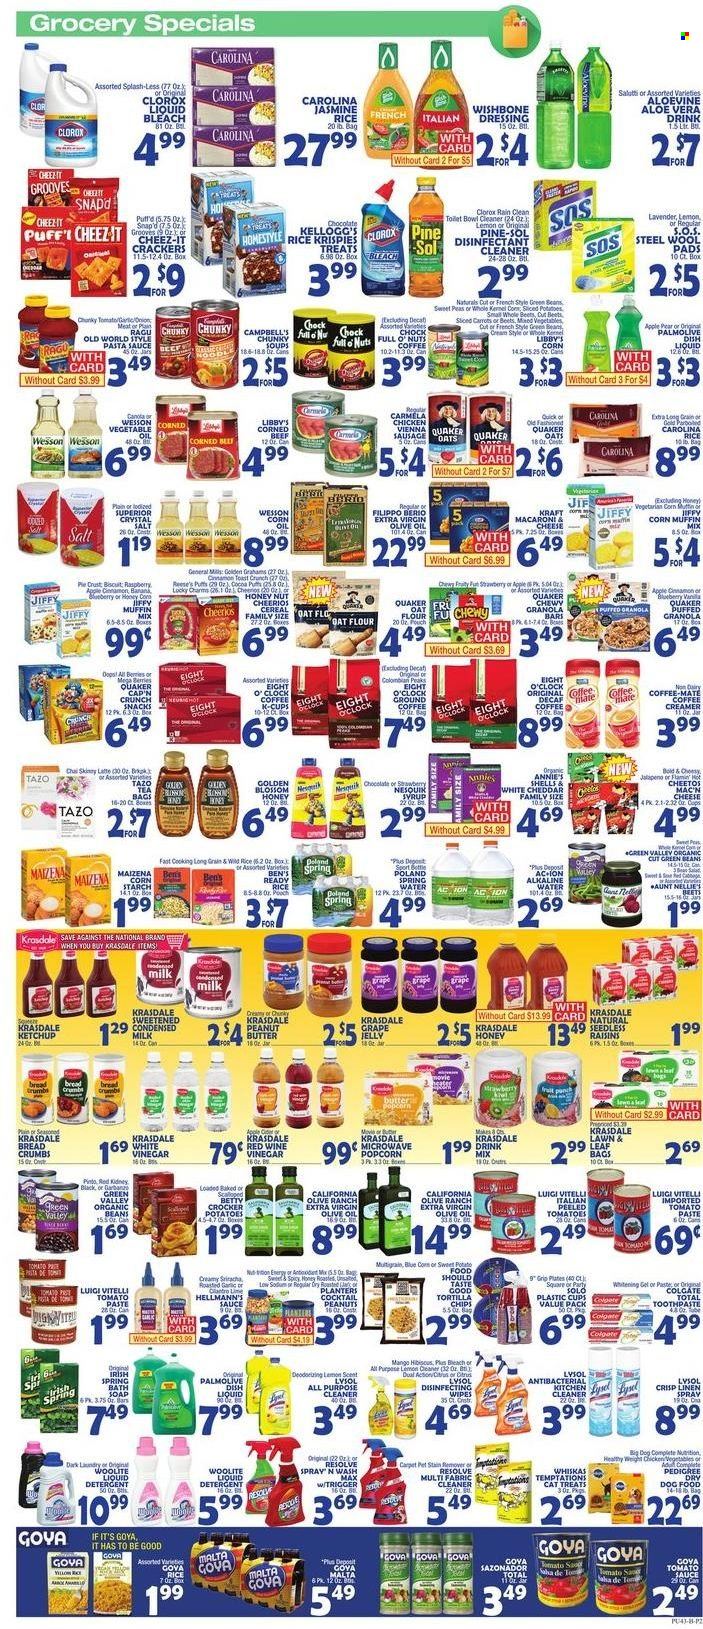 thumbnail - Bravo Supermarkets Flyer - 09/30/2022 - 10/06/2022 - Sales products - puffs, breadcrumbs, muffin mix, carrots, garlic, green beans, potatoes, peas, jalapeño, pears, Campbell's, pasta sauce, macaroni, sauce, Quaker, Annie's, Kraft®, sausage, Nesquik, Coffee-Mate, milk, condensed milk, Blossom, creamer, Hellmann’s, Reese's, mixed vegetables, chocolate, snack, jelly, crackers, biscuit, tortilla chips, Cheetos, chips, popcorn, oats, Maizena, corn muffin, tomato paste, tomato sauce, Goya, Carmela, cereals, Cheerios, granola bar, Rice Krispies, Cap'n Crunch, jasmine rice, cinnamon, sriracha, ketchup, dressing, ragu, corn oil, extra virgin olive oil, wine vinegar, olive oil, grape jelly, peanut butter, Jif, raisins, peanuts, Planters, spring water, alkaline water, tea, ground coffee, coffee capsules, K-Cups, Eight O'Clock, detergent, cleaner, bleach, desinfection, all purpose cleaner, stain remover, Lysol, Clorox, Woolite, Pine-Sol, liquid detergent, dishwashing liquid, Palmolive, soap, Colgate. Page 2.